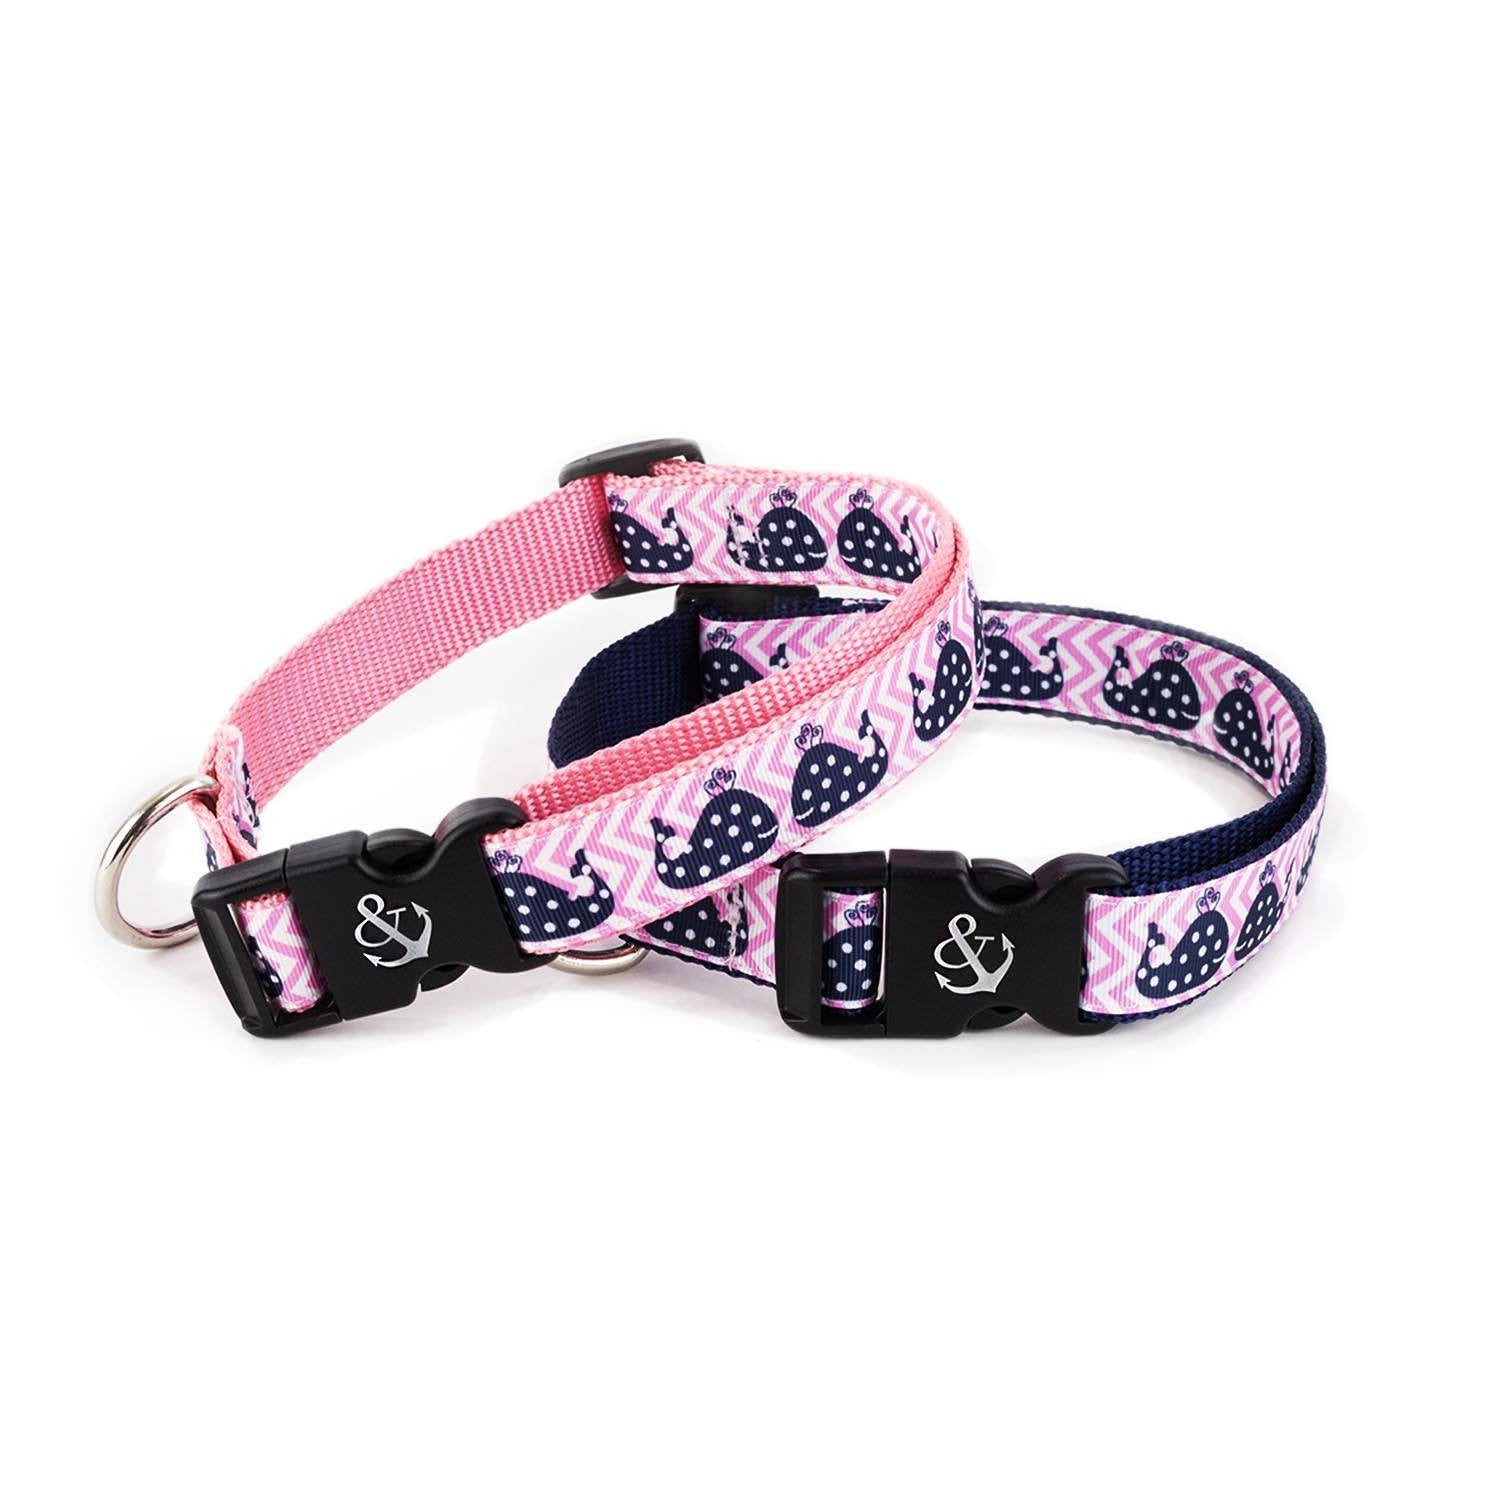 Blue Whales on Pink Collar - Beach & Dog Co.